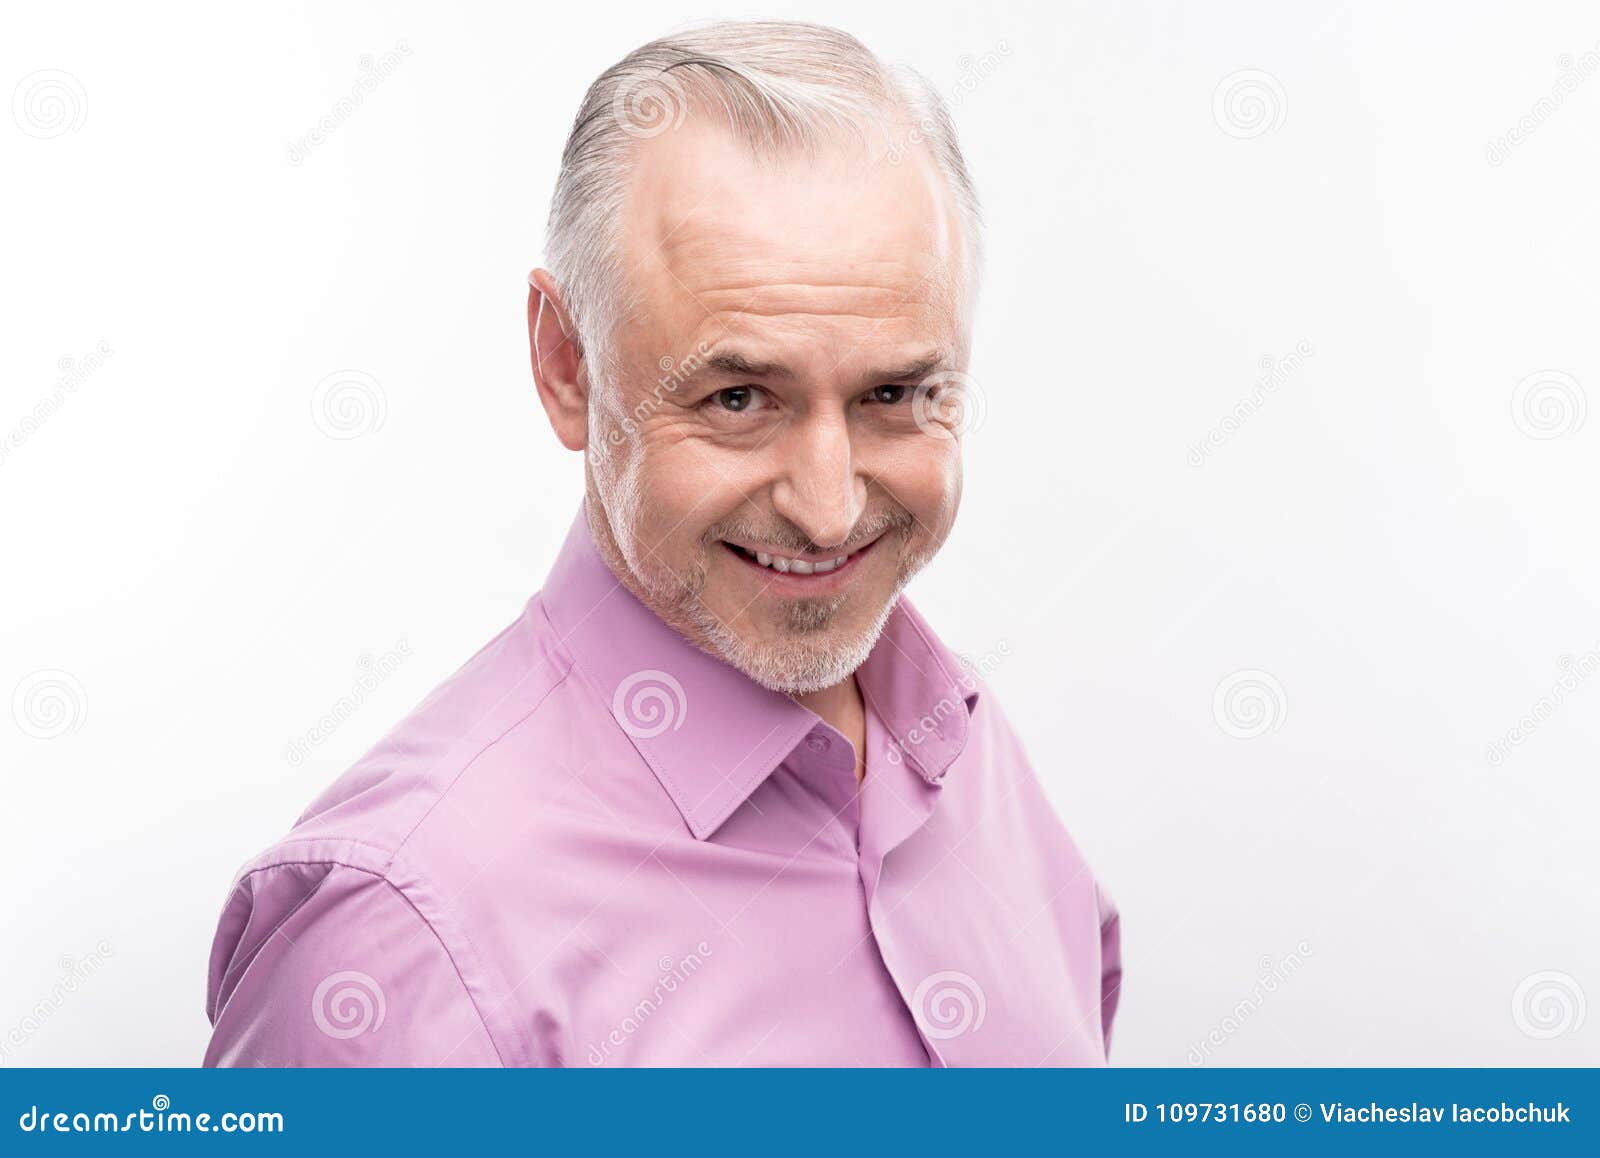 handsome grey-haired man smiling cheekily while posing